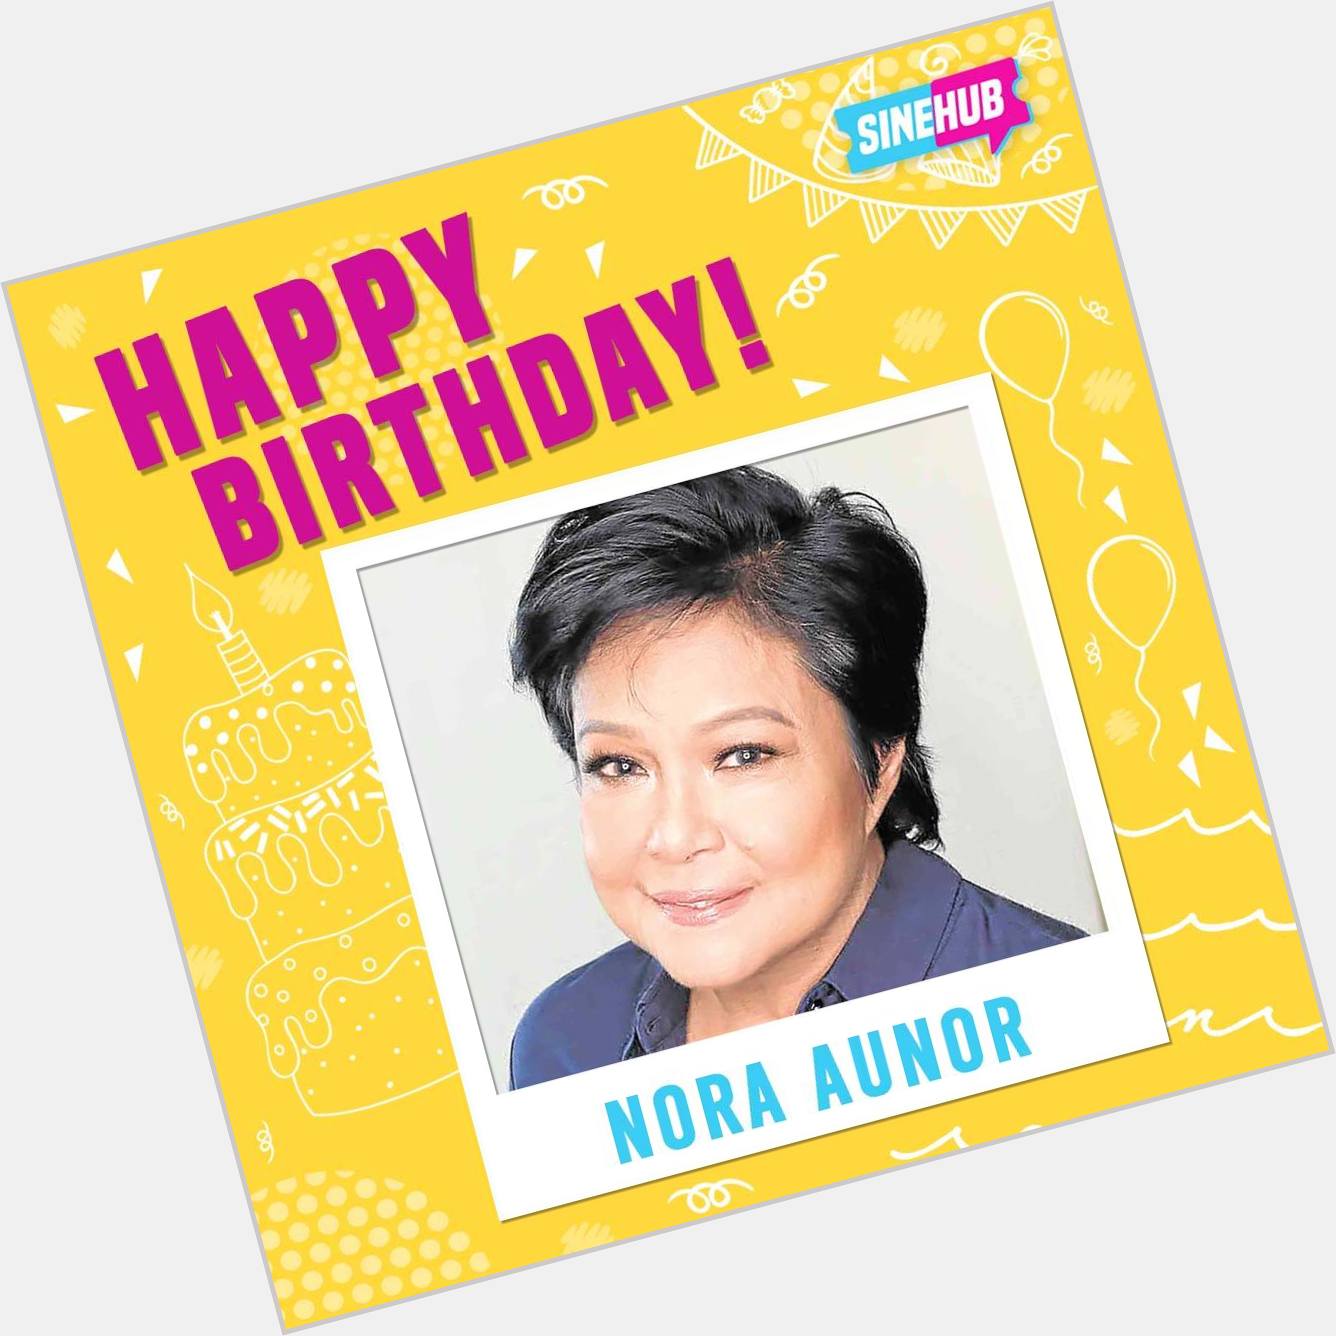 Today and every day, you are THE Superstar. Happy birthday, Nora Aunor! 